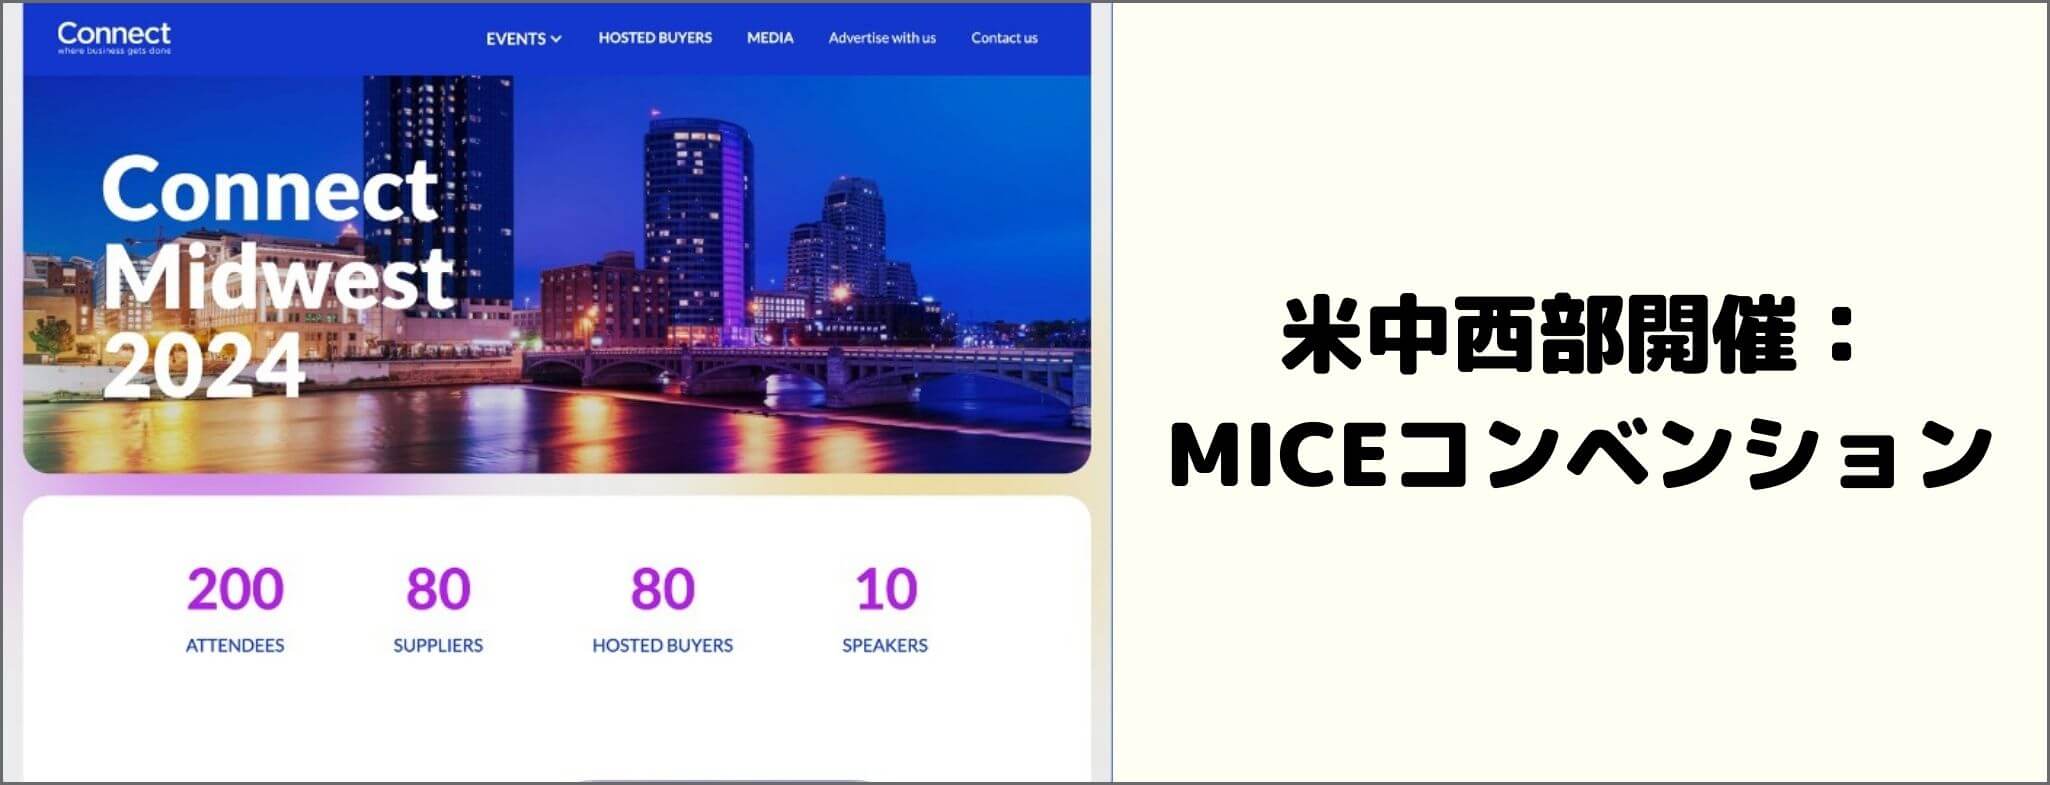 Connect Midwest 2024 イベントグローブ